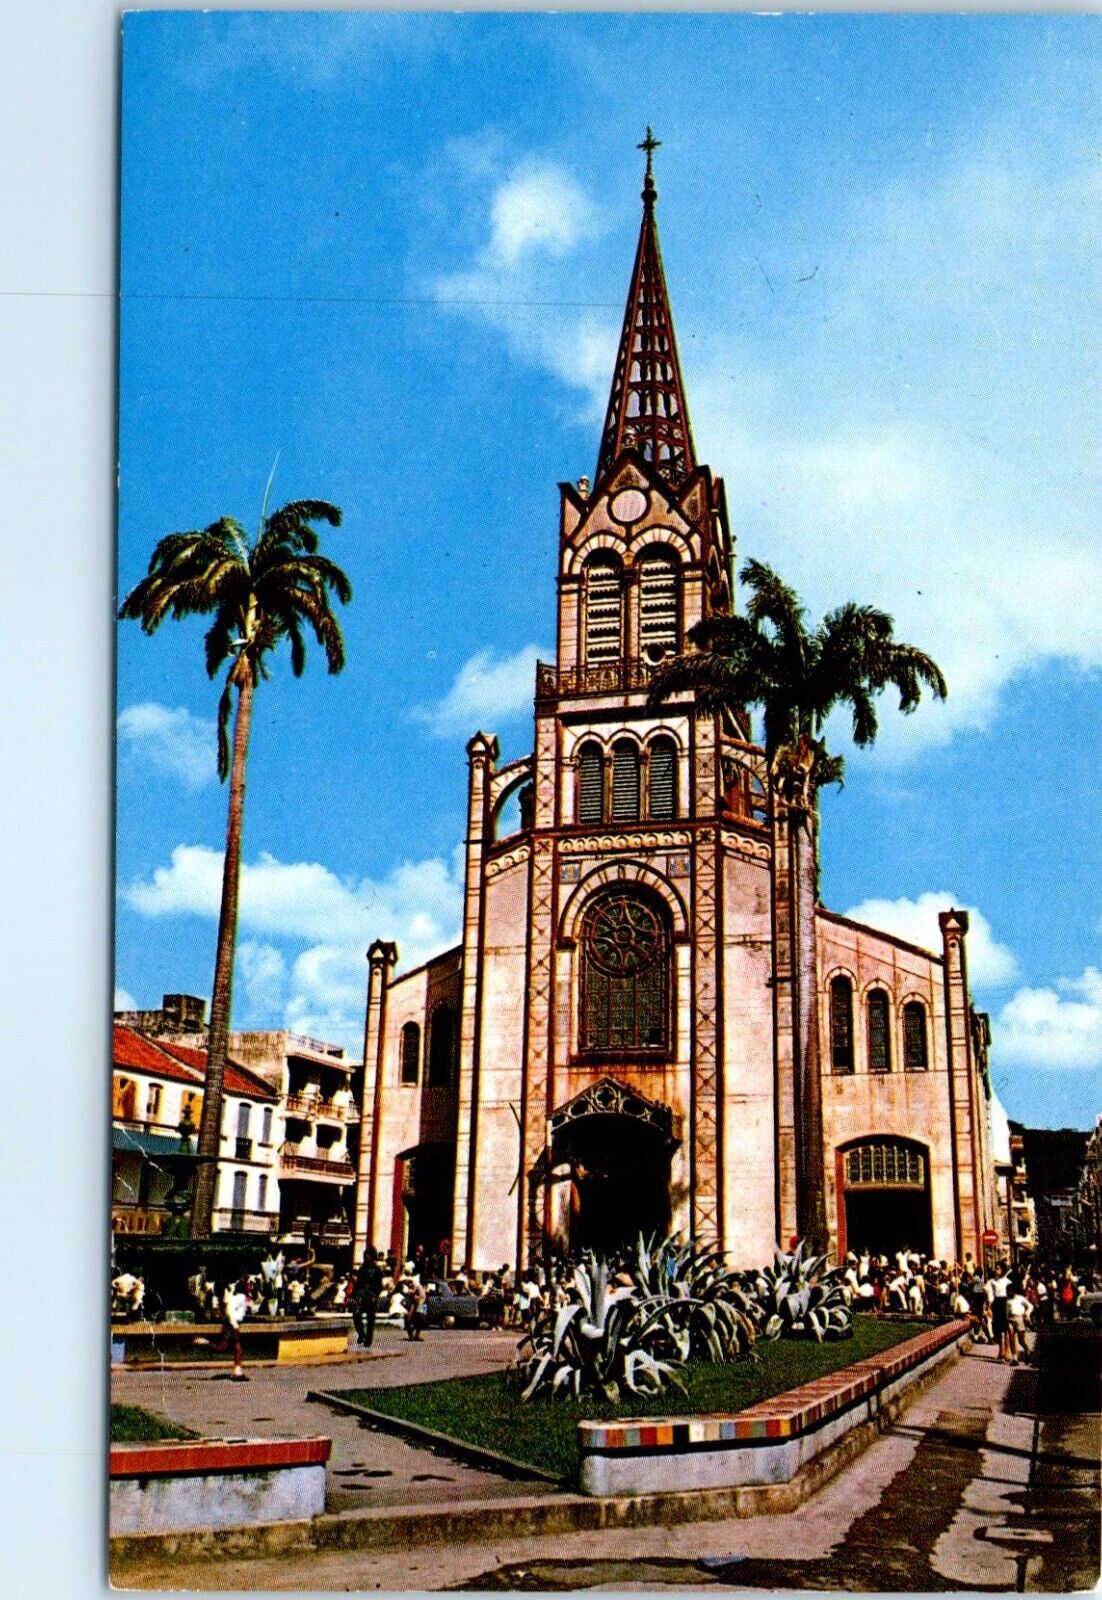 The Cathedral Fort-De-France, Martinique Island Postcard